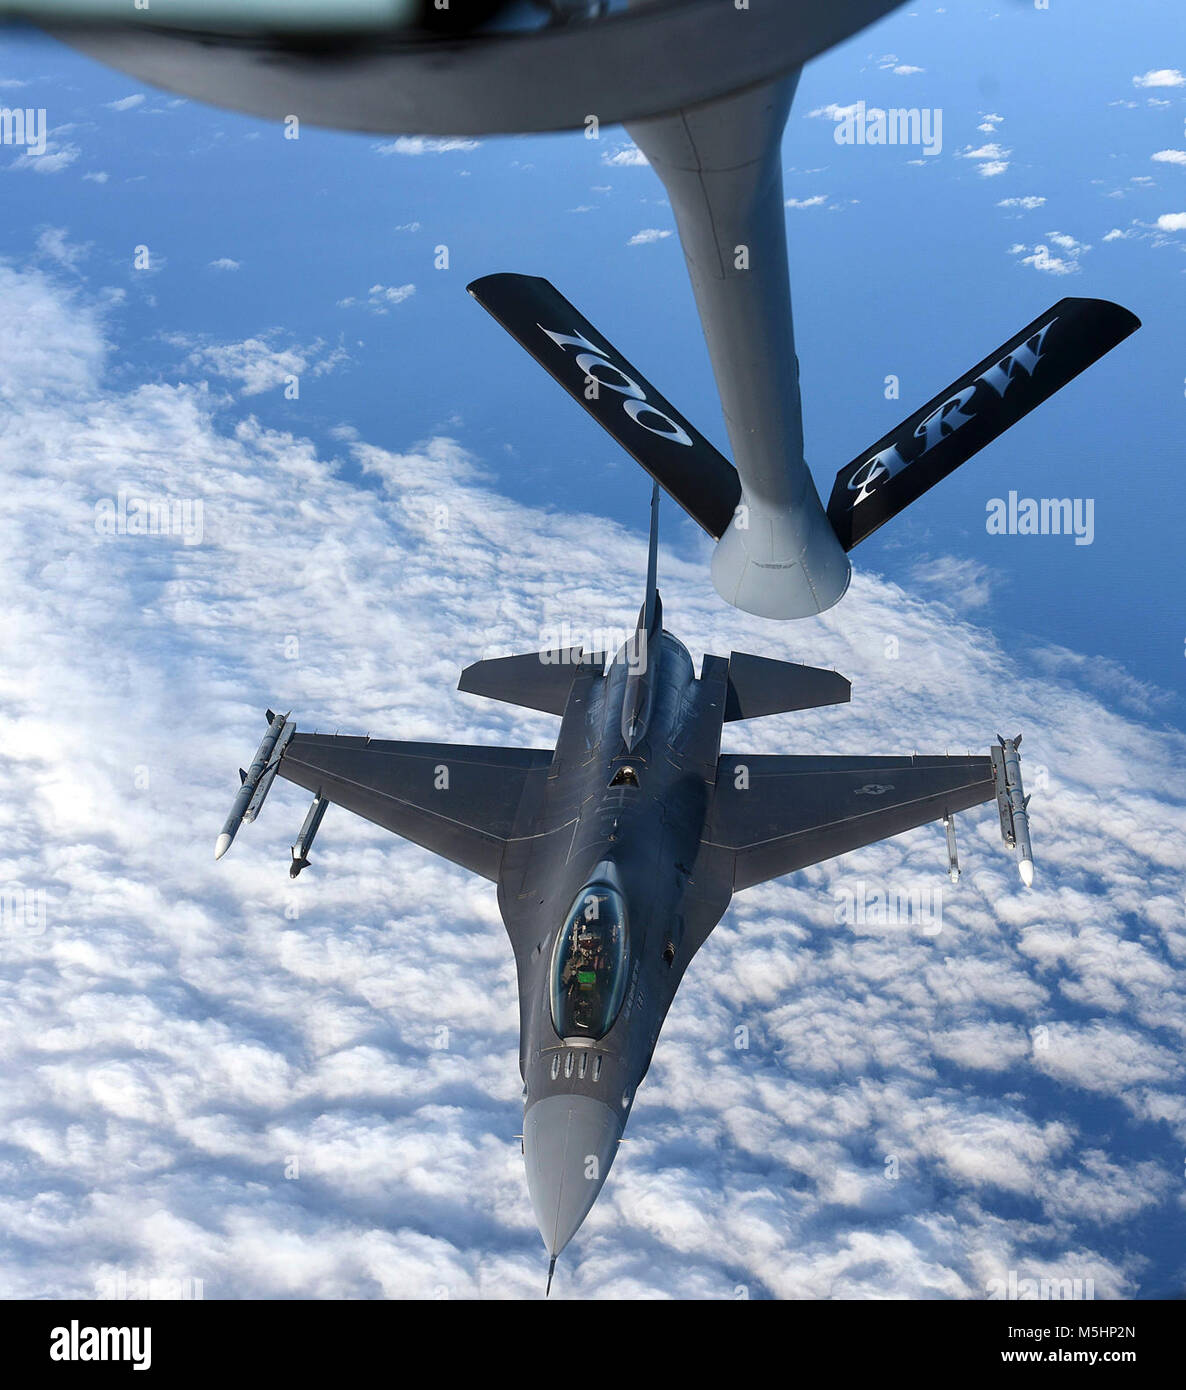 U.S. Air Force F-16C Fighting Falcon flies behind a U.S. Air Force KC-135 Stratotanker before conducting an aerial refueling during training in Swedish airspace, Feb. 8, 2018. The training was in conjunction with a rotational deployment of U.S. Air Force F-16C Fighting Falcons from the Ohio Air National Guard’s 180th Fighter Wing to Amari Air Base, Estonia, as part of a Theater Security Package. (U.S. Air Force Stock Photo